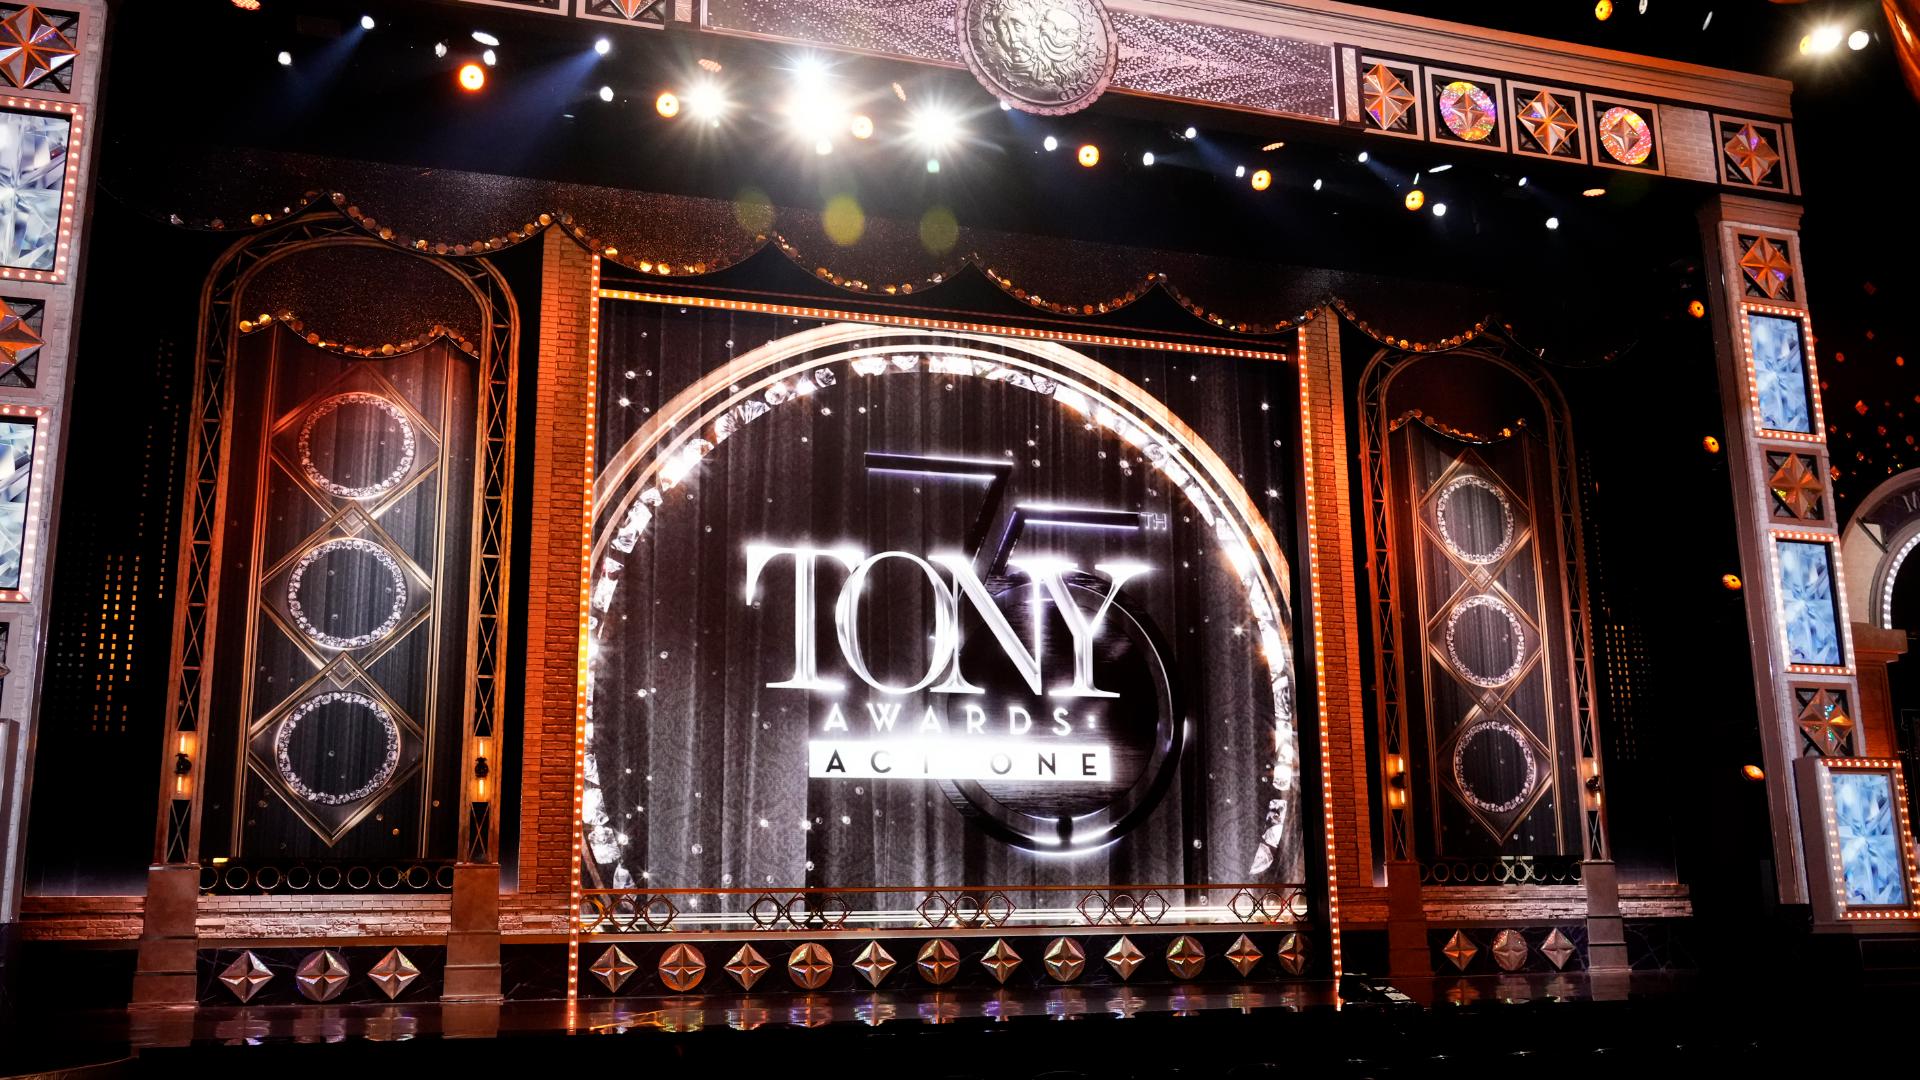 Tony Award nominations Broadway shows compete for nominations